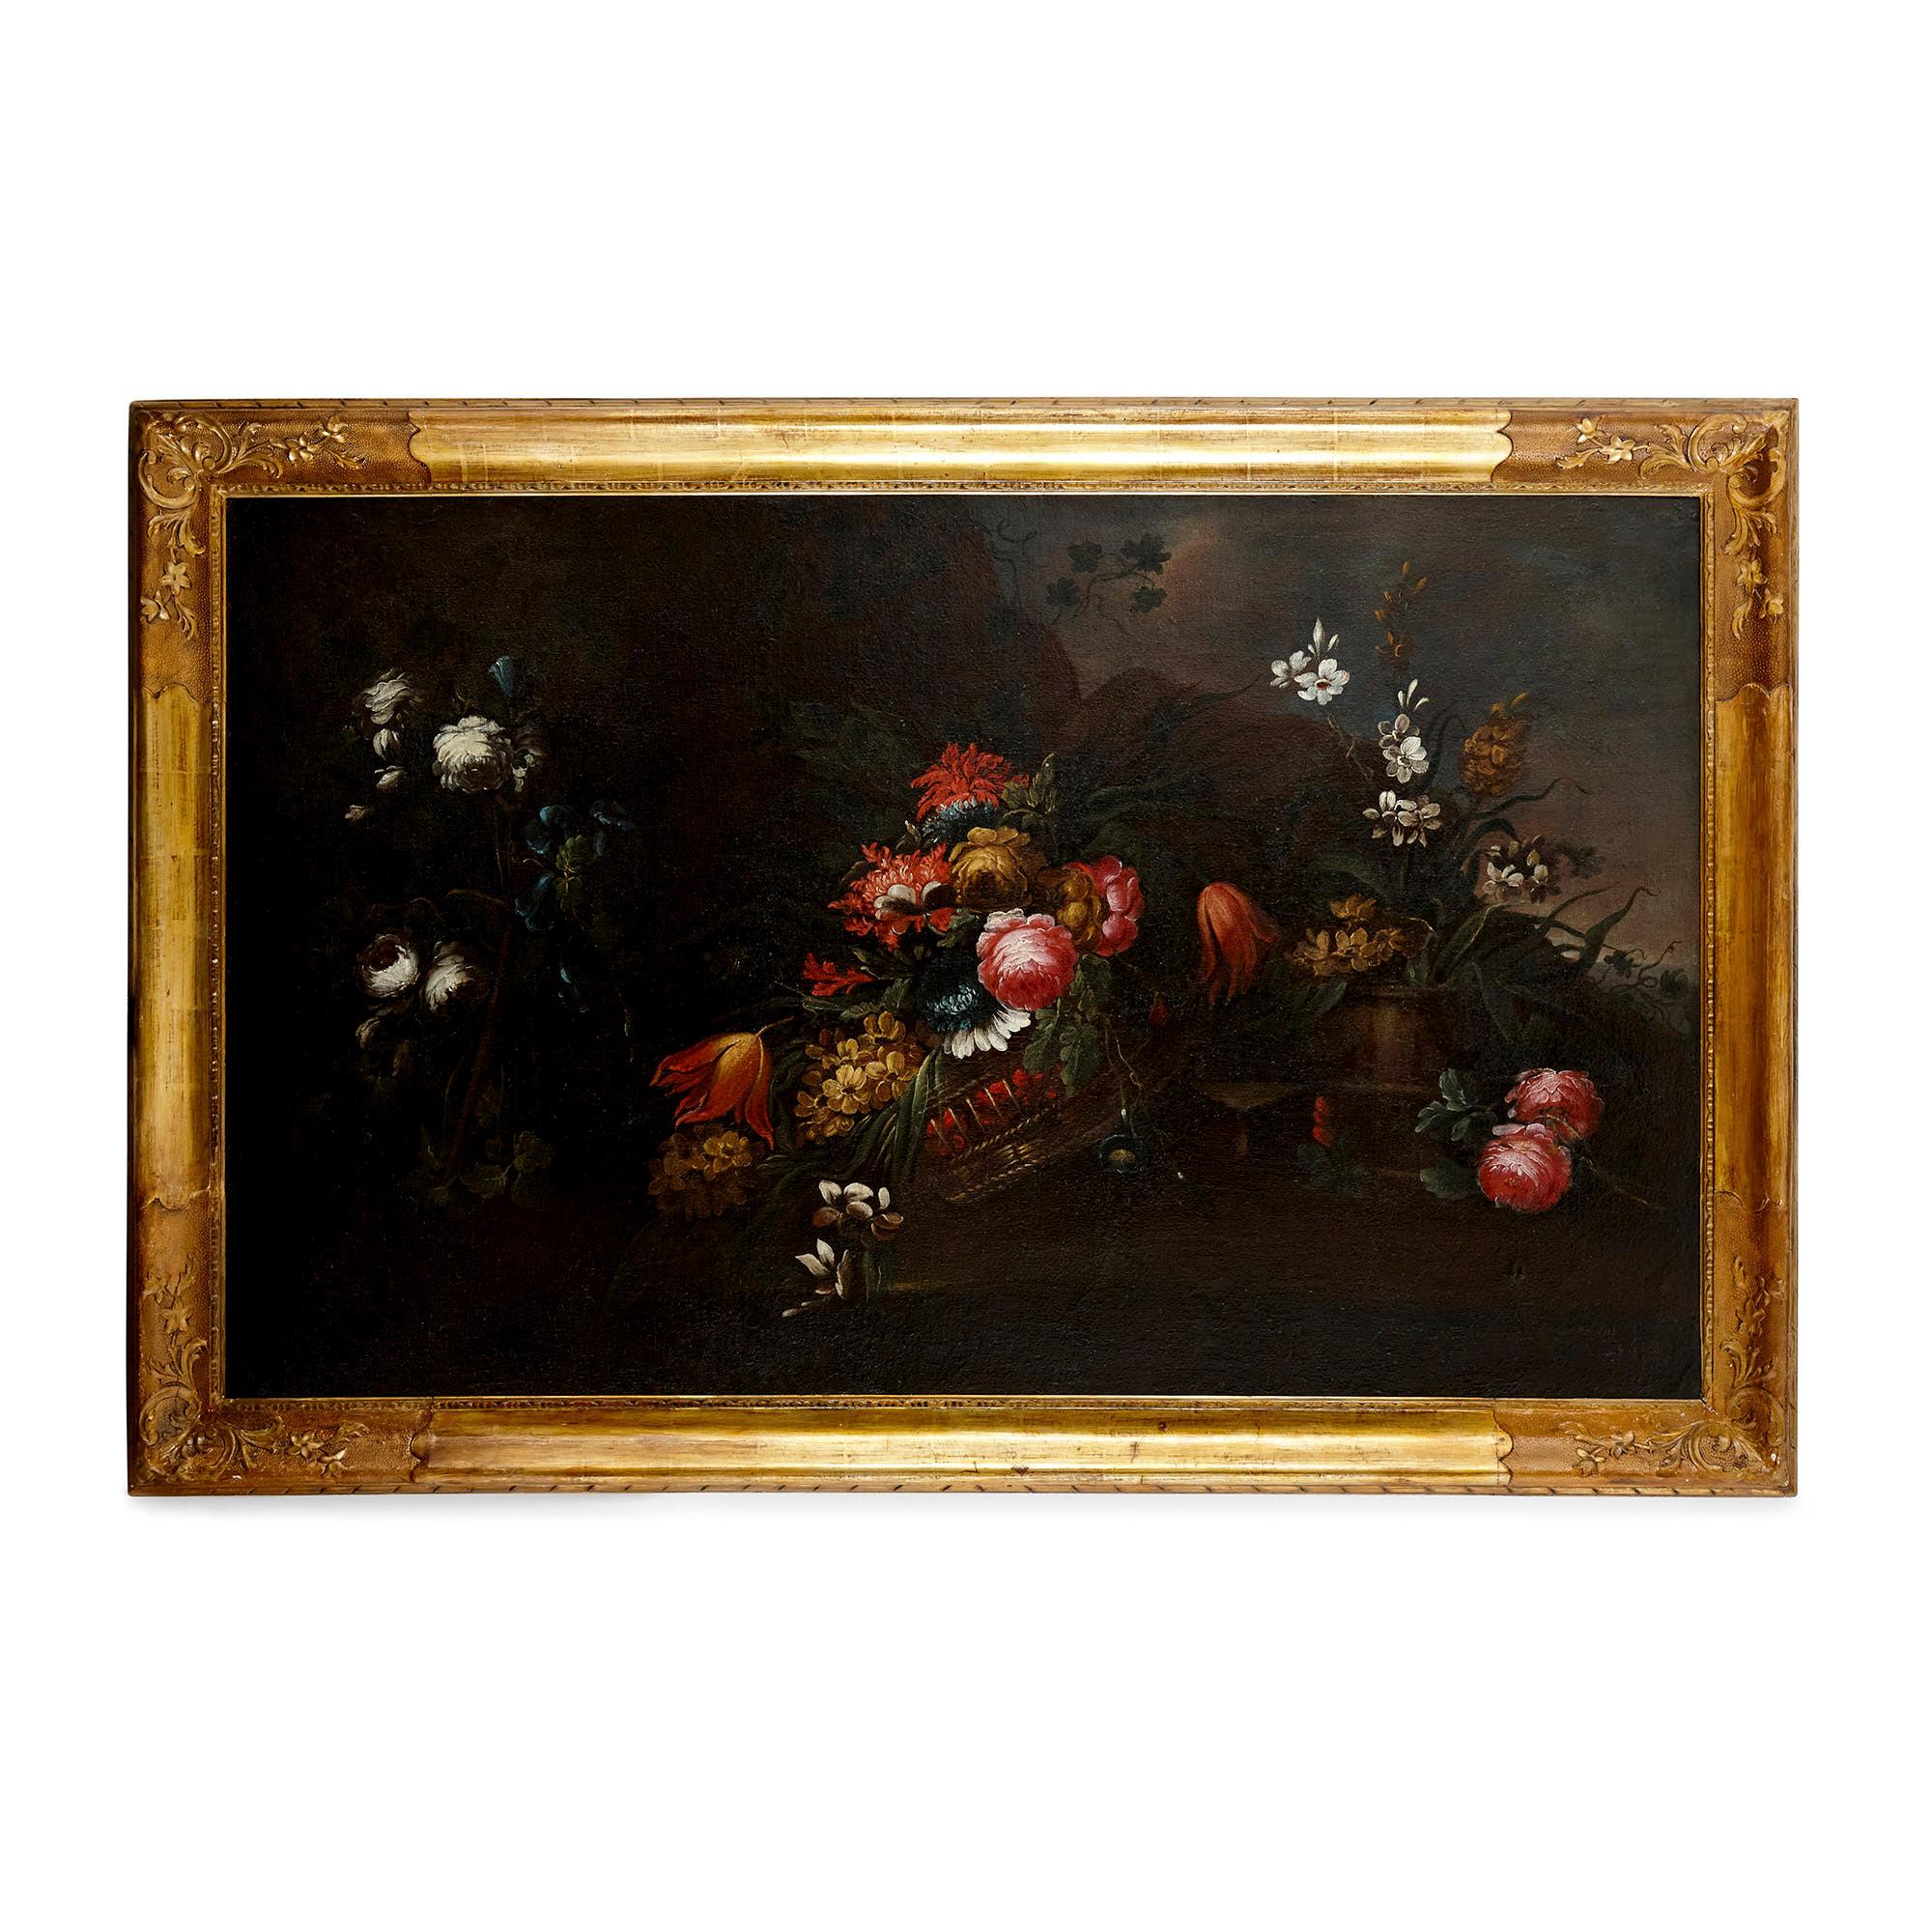 Pair of Antique 17th Century Floral Still Life Paintings, Attributed to Vincenzino
Italian, second half 17th Century
Dimensions: Frame height 111cm, width 170cm, depth 7cm; Canvas height 94cm, width 151.5cm

This beautiful pair of Italian still life